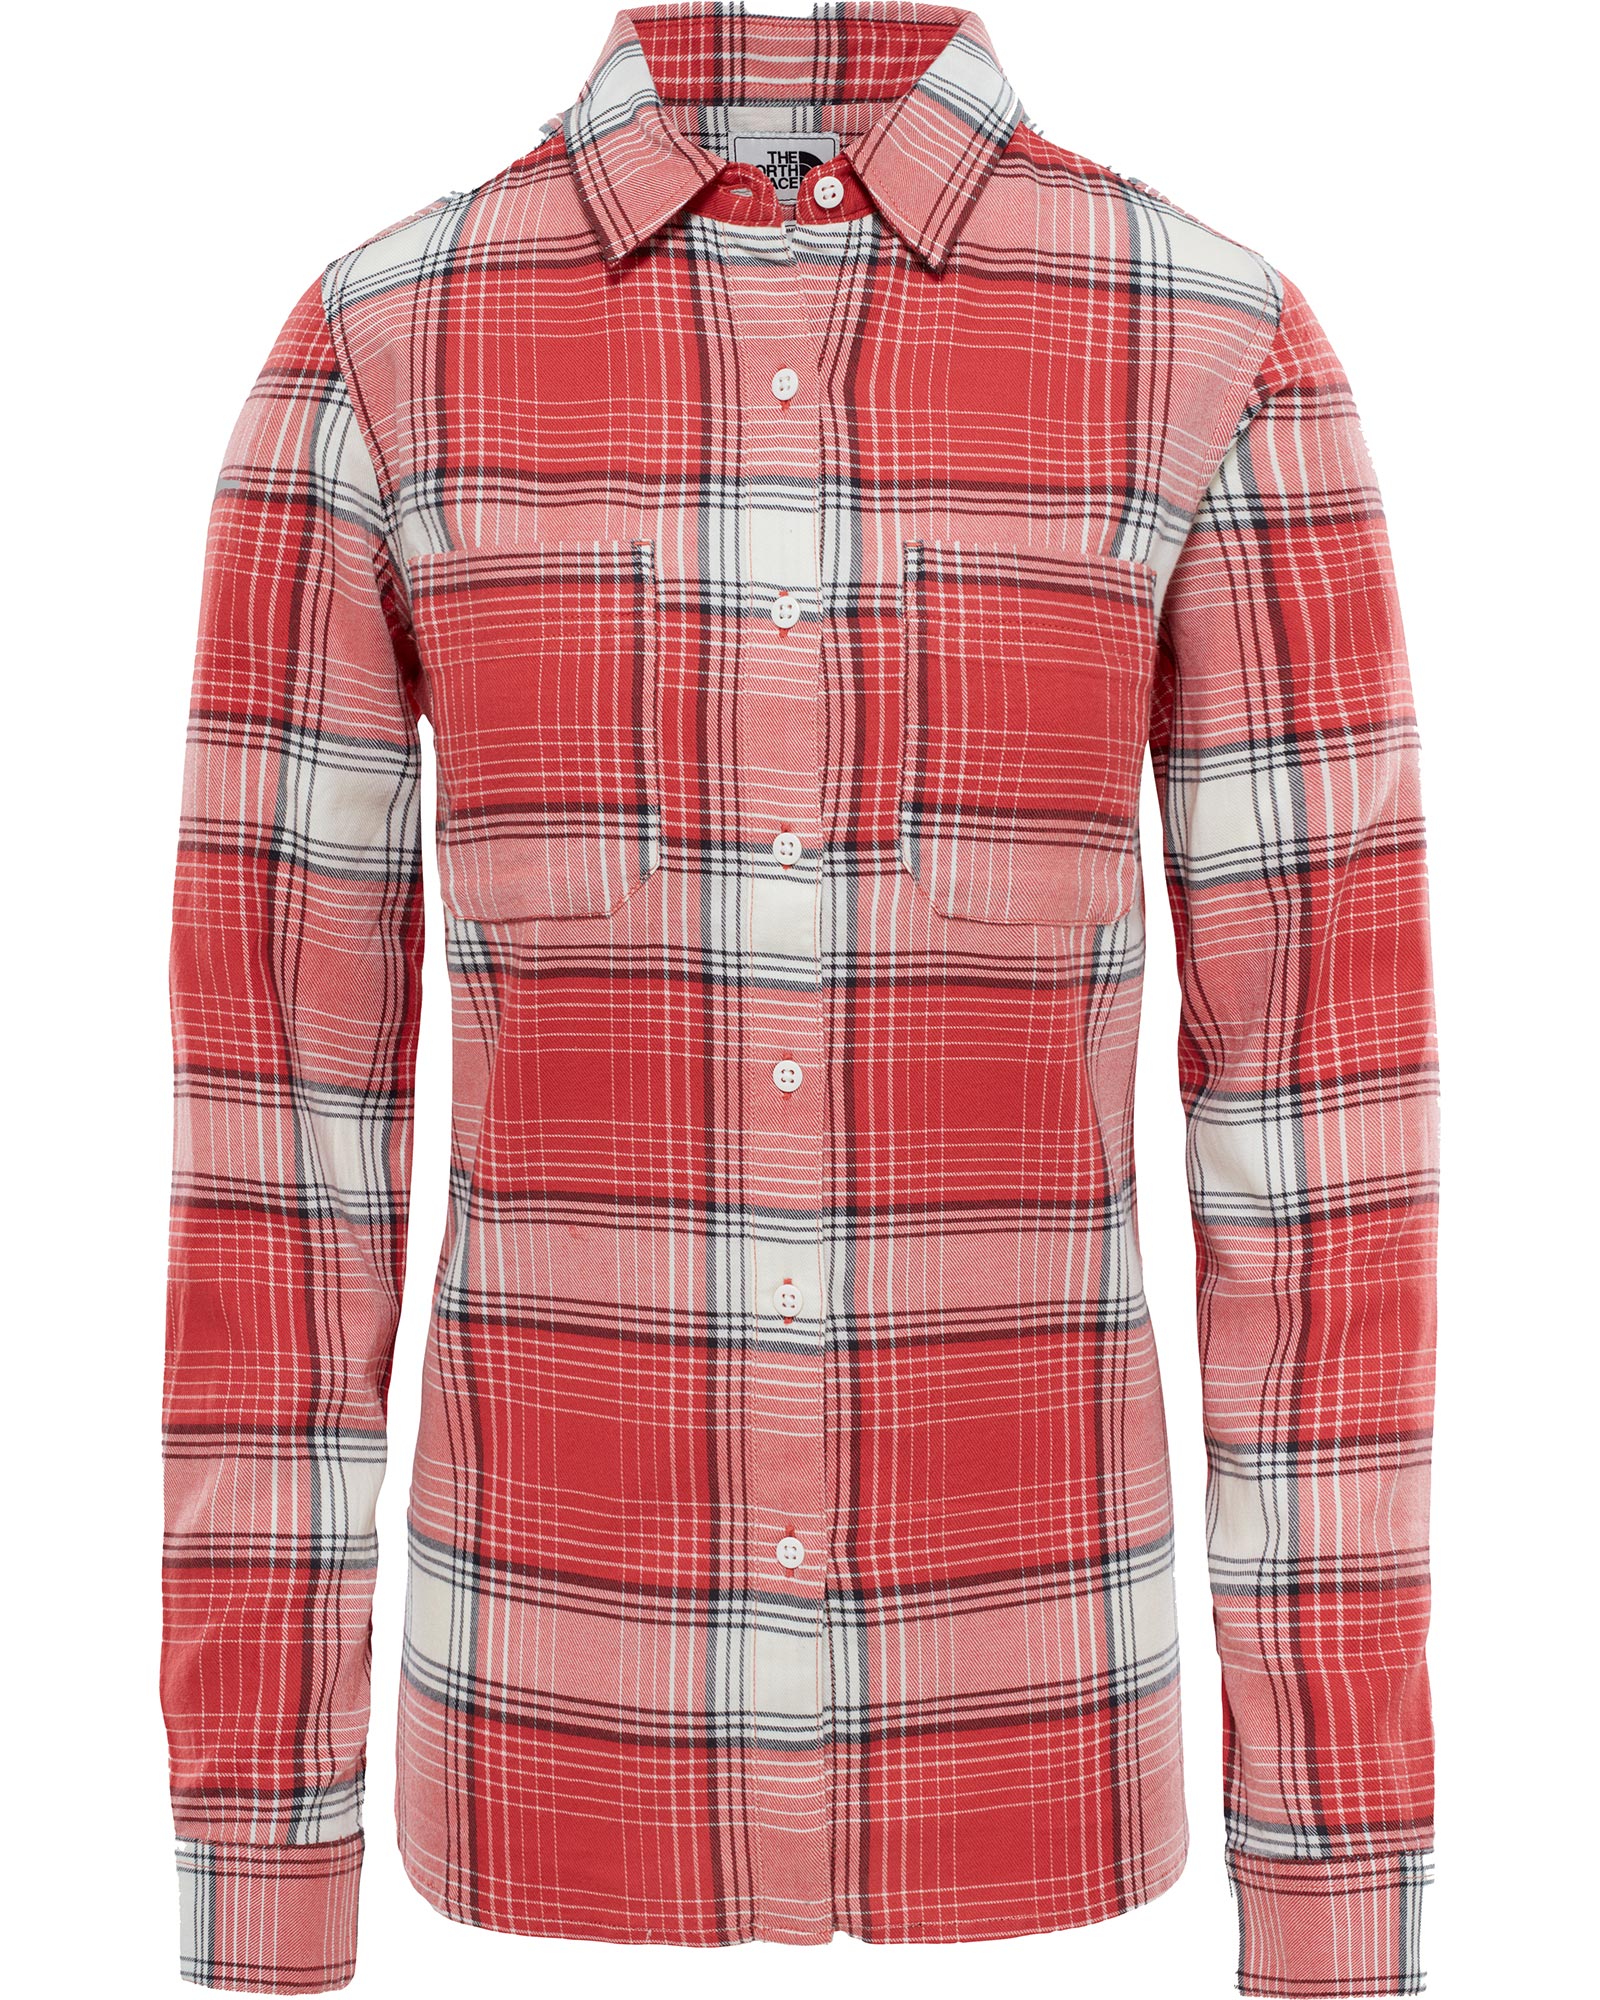 The North Face Castleton Women’s Long Sleeve Shirt - Sunbaked Red M